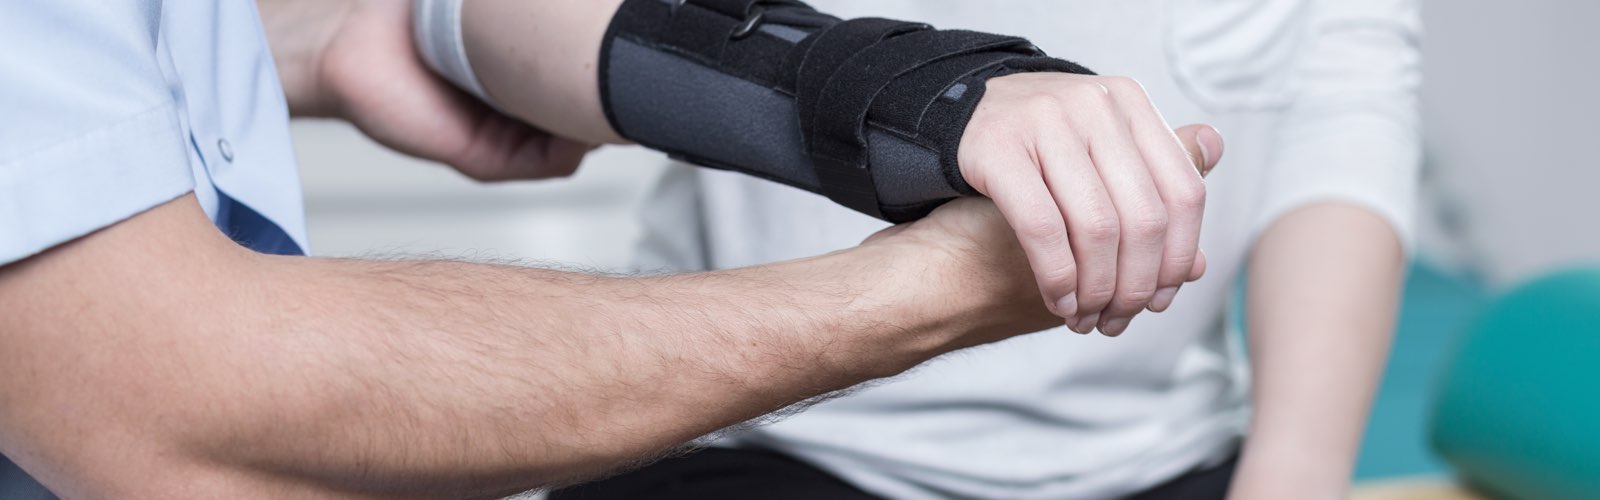 Physical therapist holding patient's arm in cast